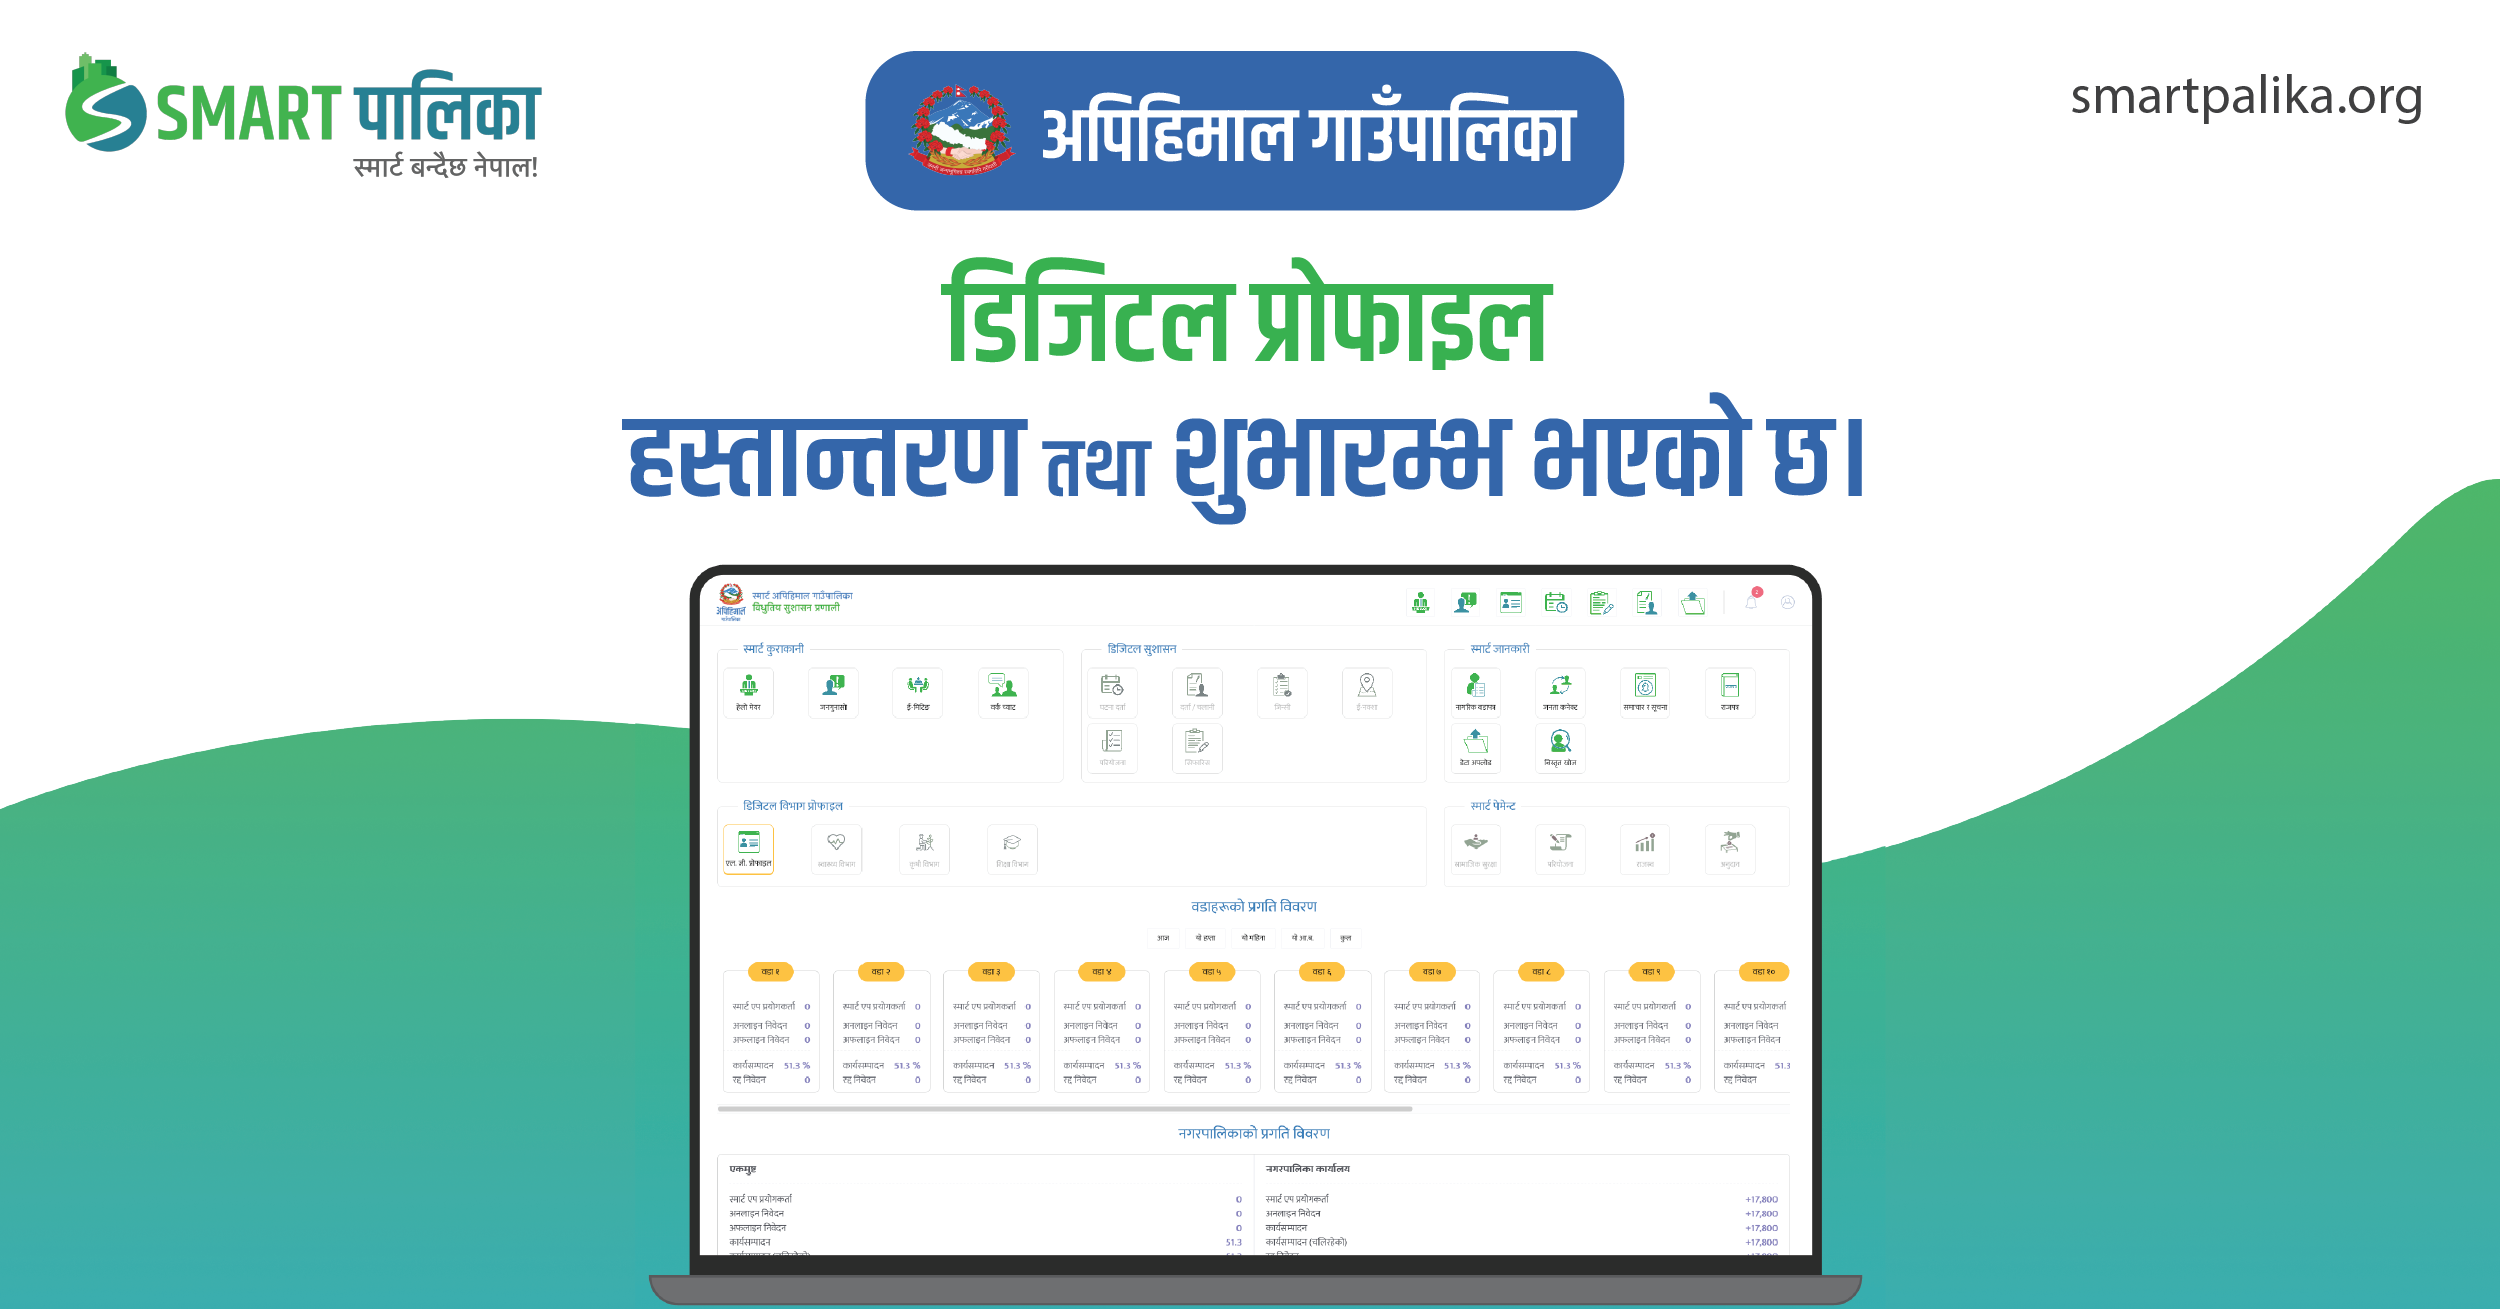 Digital Profile of Api Himal Rural Municipality now launched!